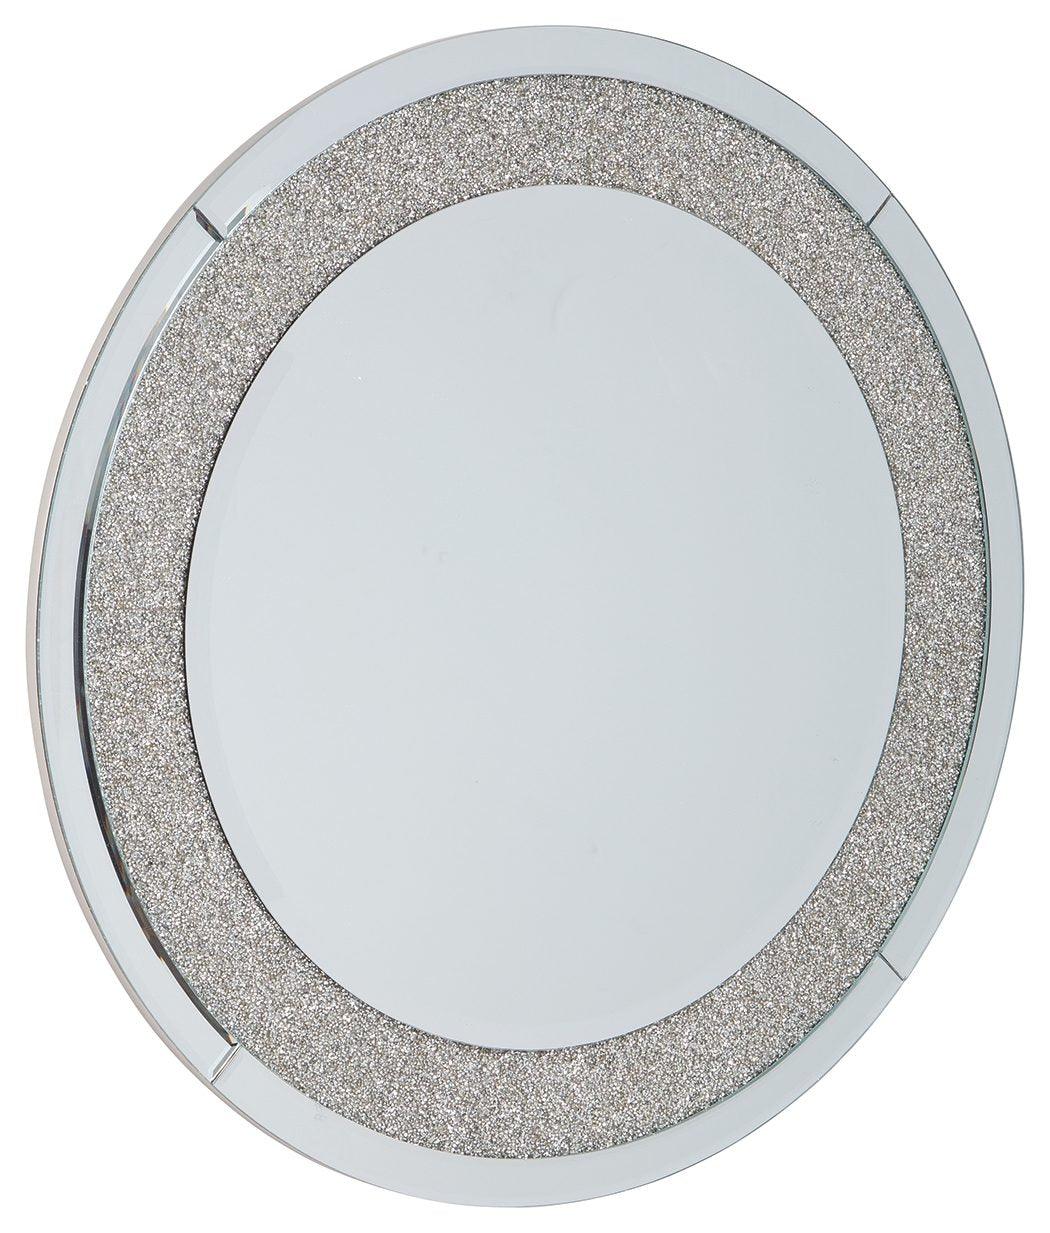 Kingsleigh - Metallic - Accent Mirror - Round Tony's Home Furnishings Furniture. Beds. Dressers. Sofas.